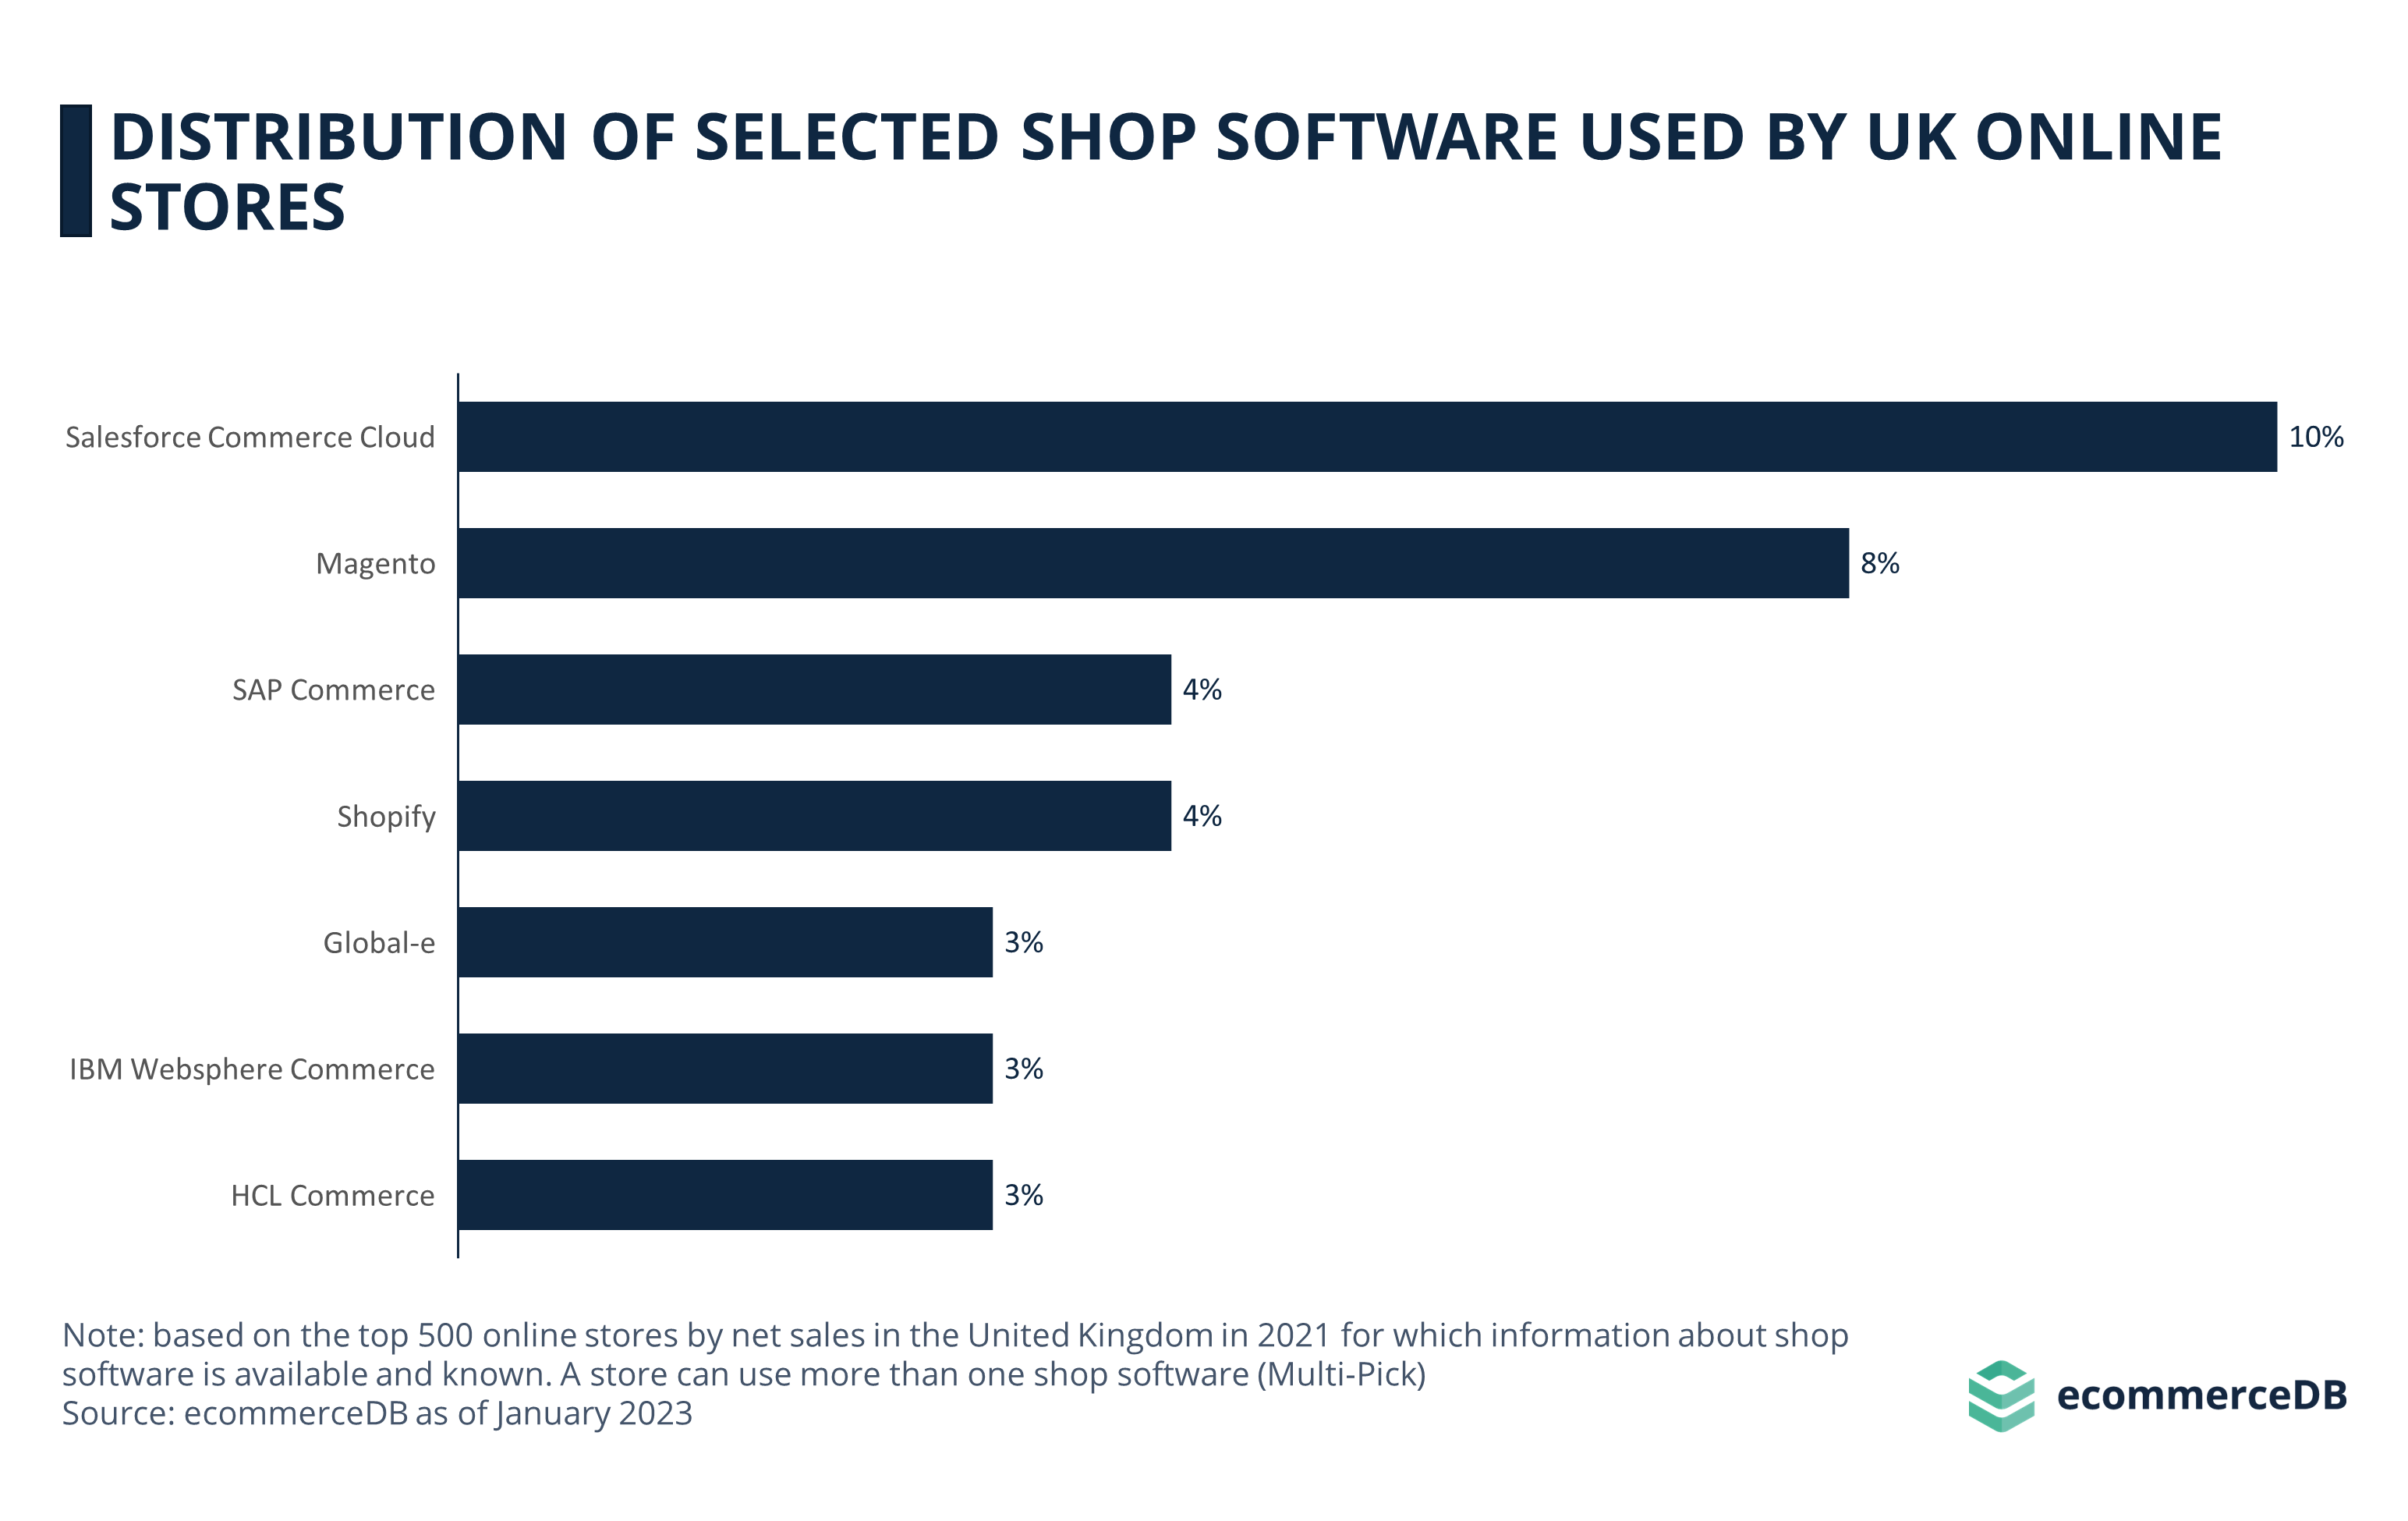 Distribution of Selected Shop Software Used by UK Online Stores